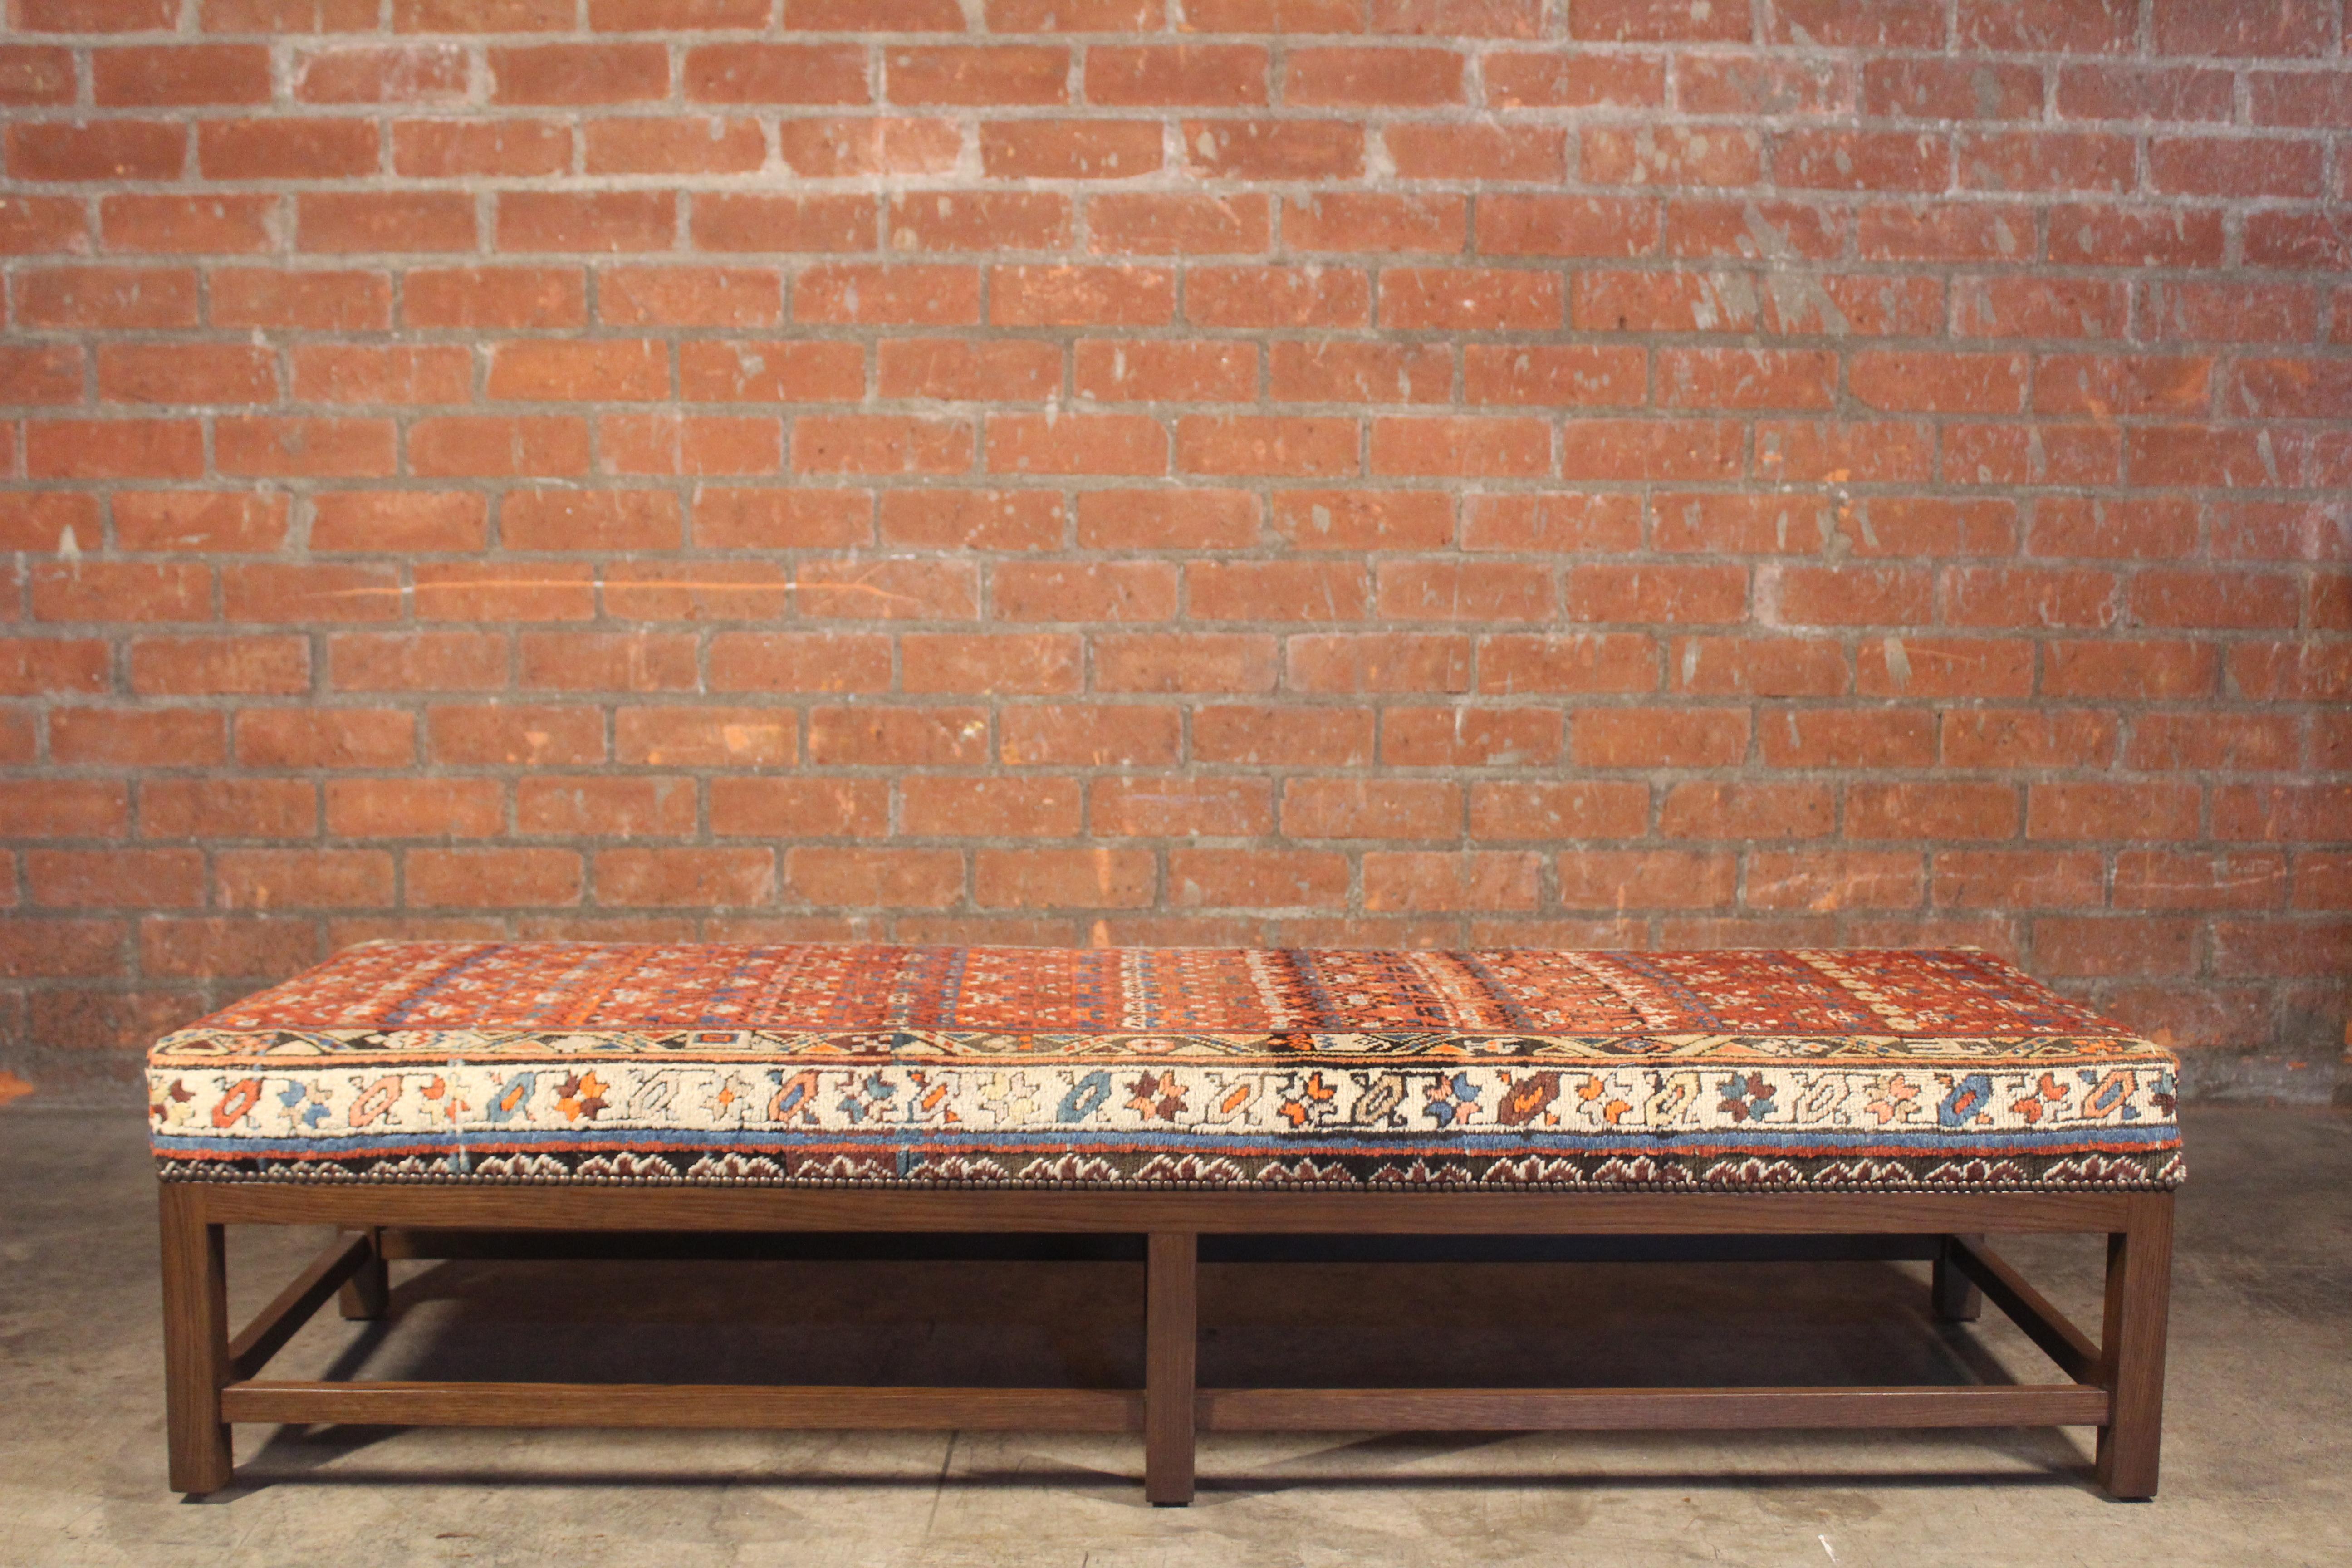 A custom made Lexington ottoman or bench, upholstered in a vintage Turkish rug. The base is solid oak in a dark finish with brass nail head details. The rug was cleaned prior to upholstery. Perfect as an ottoman or a bench at the foot of a bed.